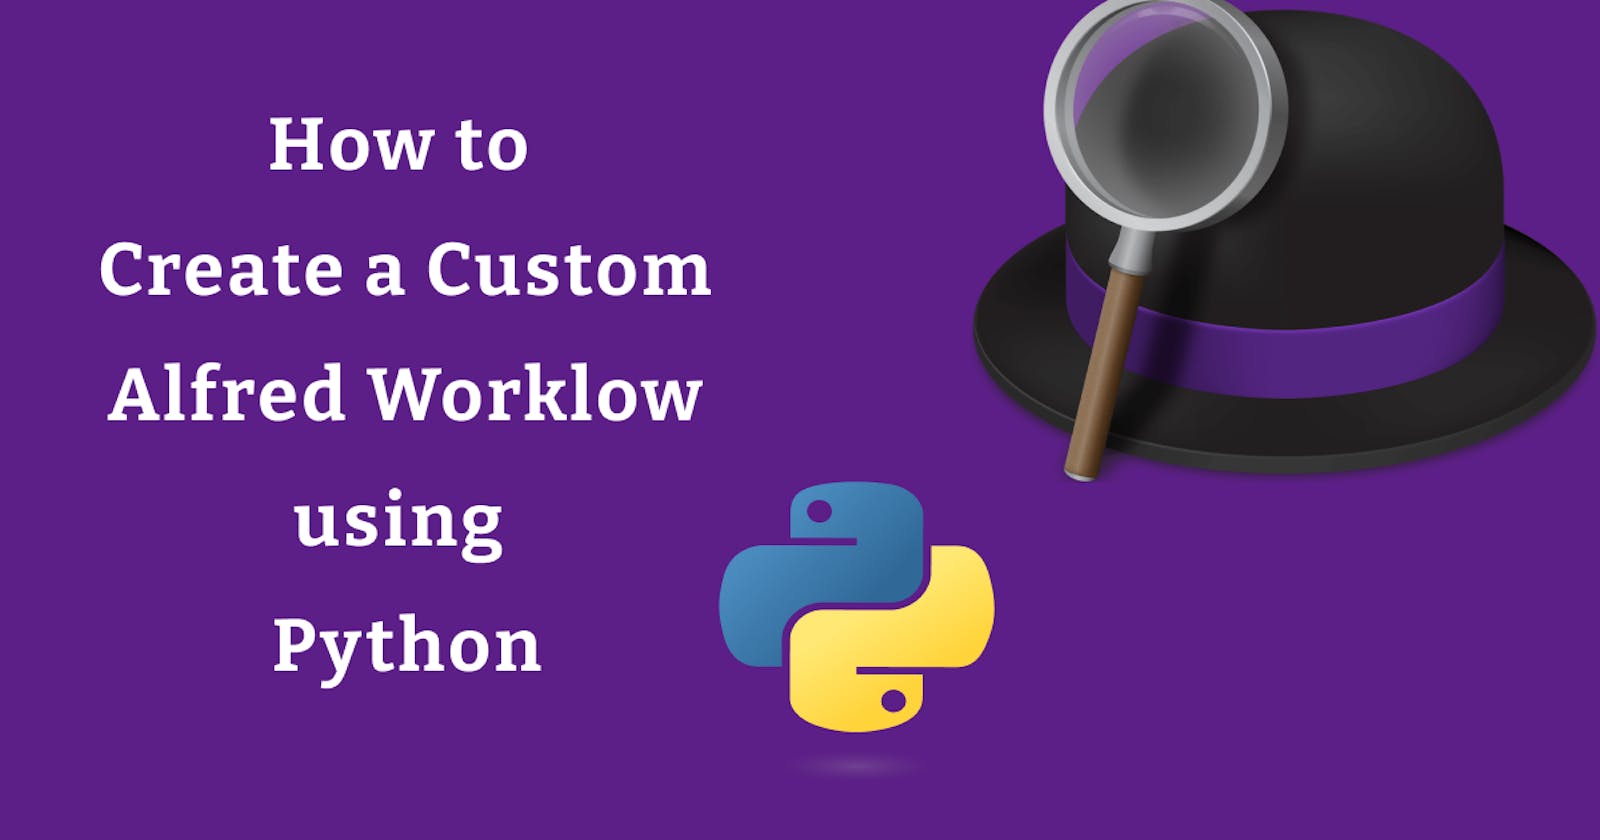 How to Create a Custom Alfred Workflow using Python